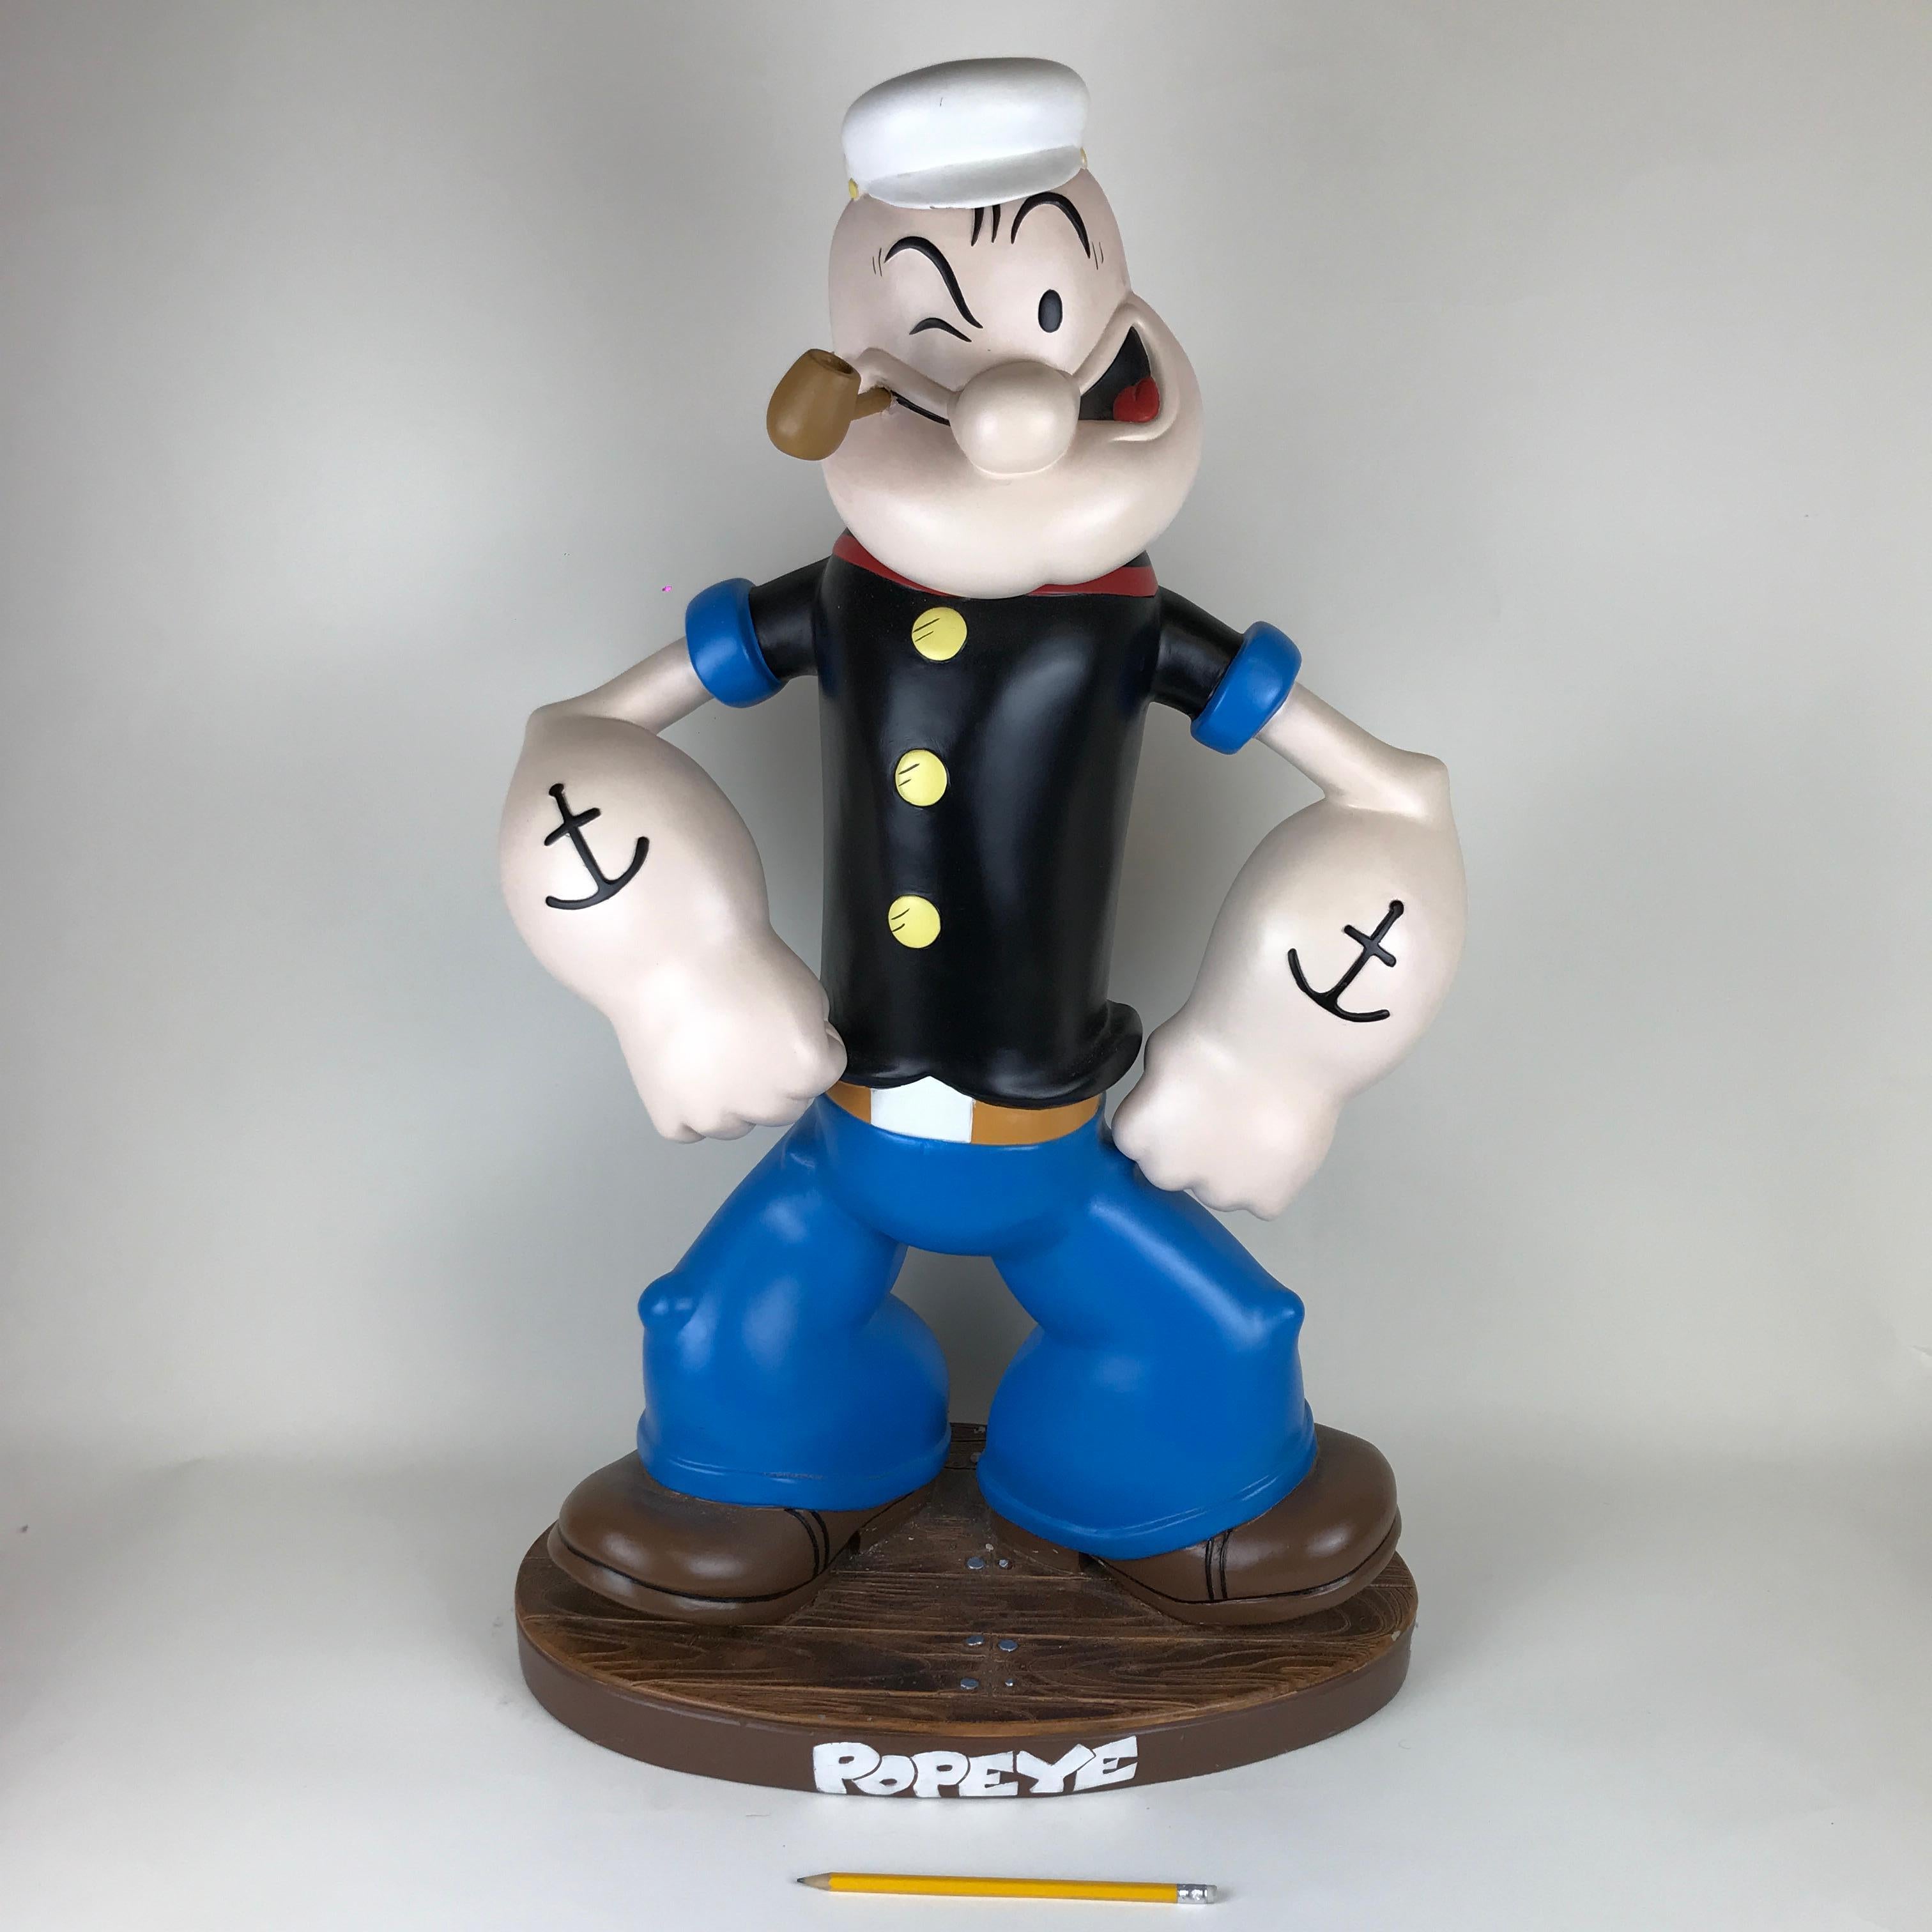 2019 marks the 90th birthday of the famed comic character Popeye the Sailor.

This vintage original Popeye the Sailor with pipe resin sculpture sits on a base with the name Popeye on the front, and was made in the 1990s in the USA.

The back of